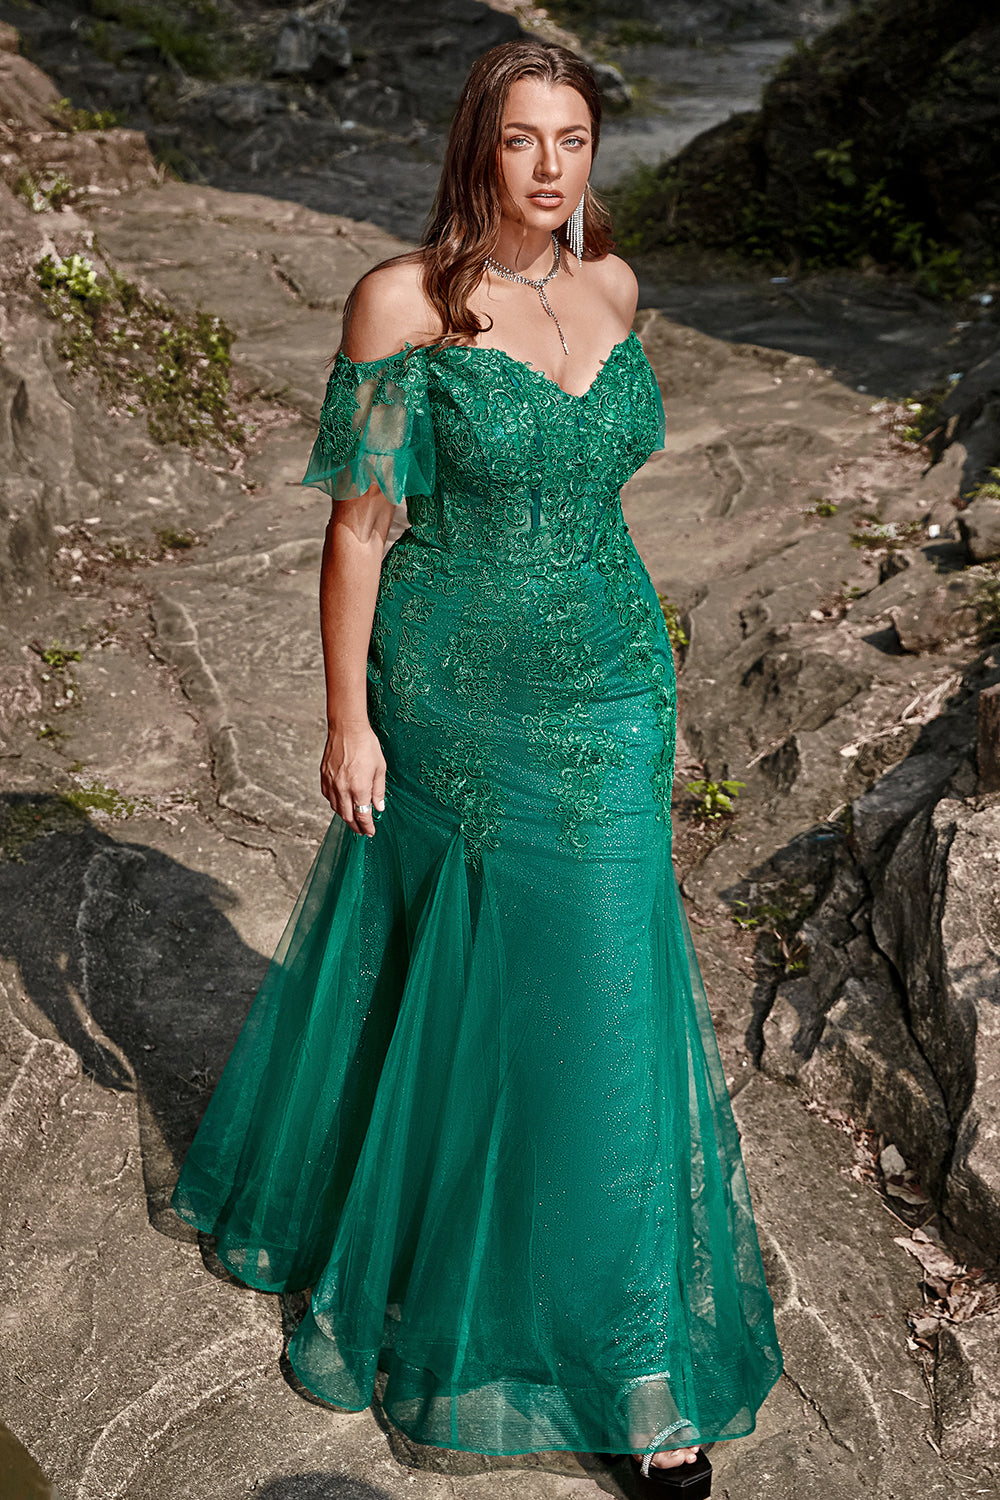 Mermaid Off the Shoulder Dark Green Plus Size Prom Dress with Appliques